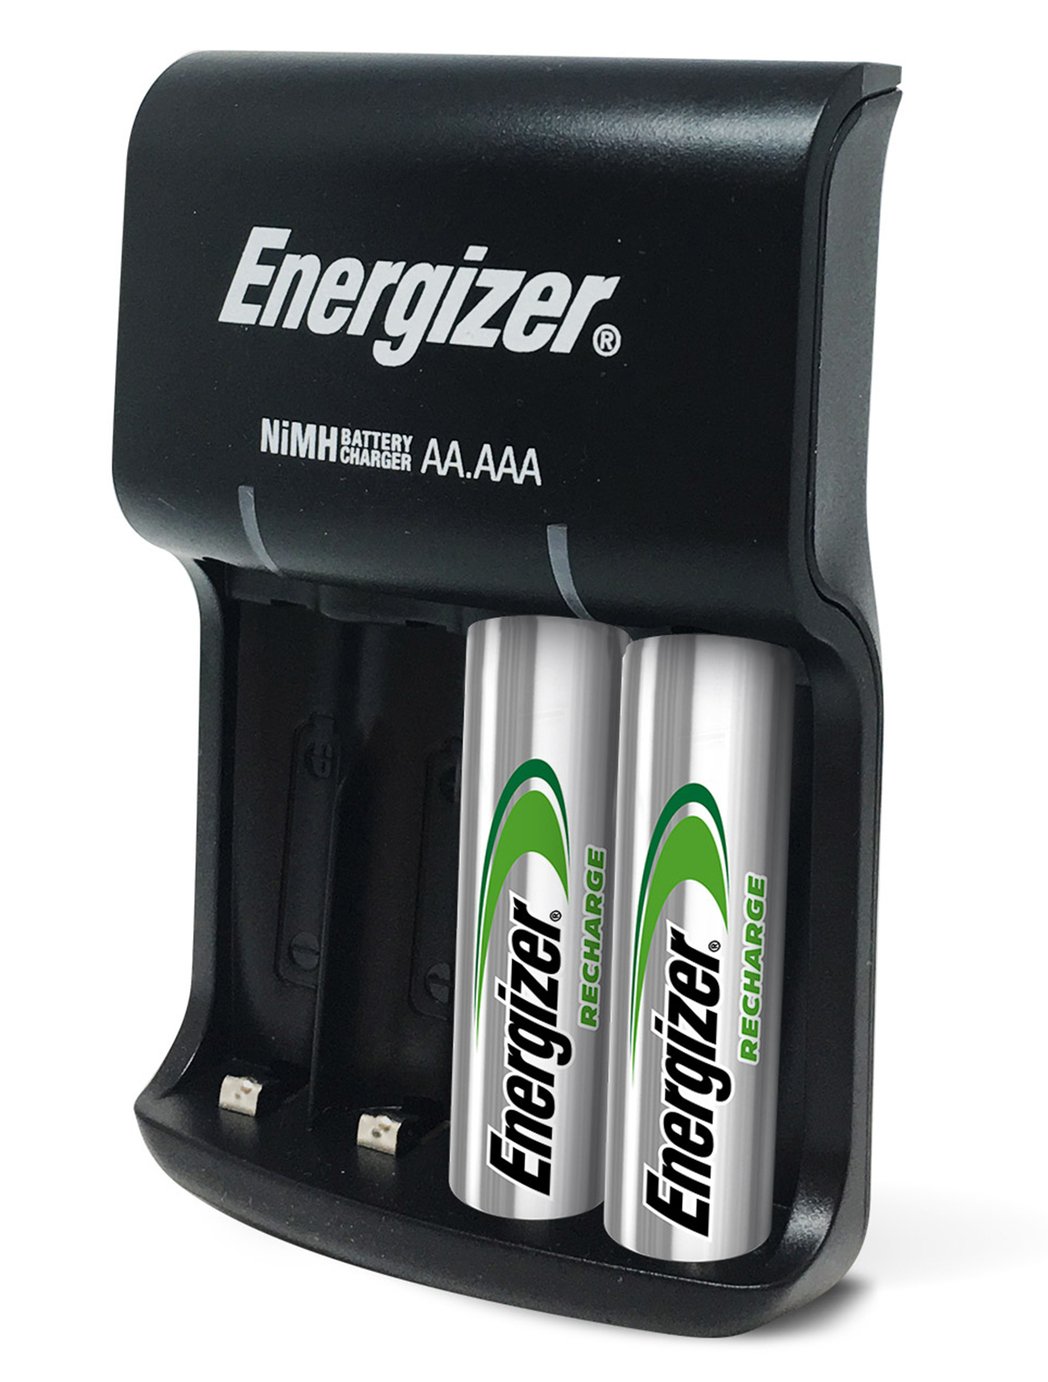 Energizer Base Battery Charger with 4 x AA Batteries Review